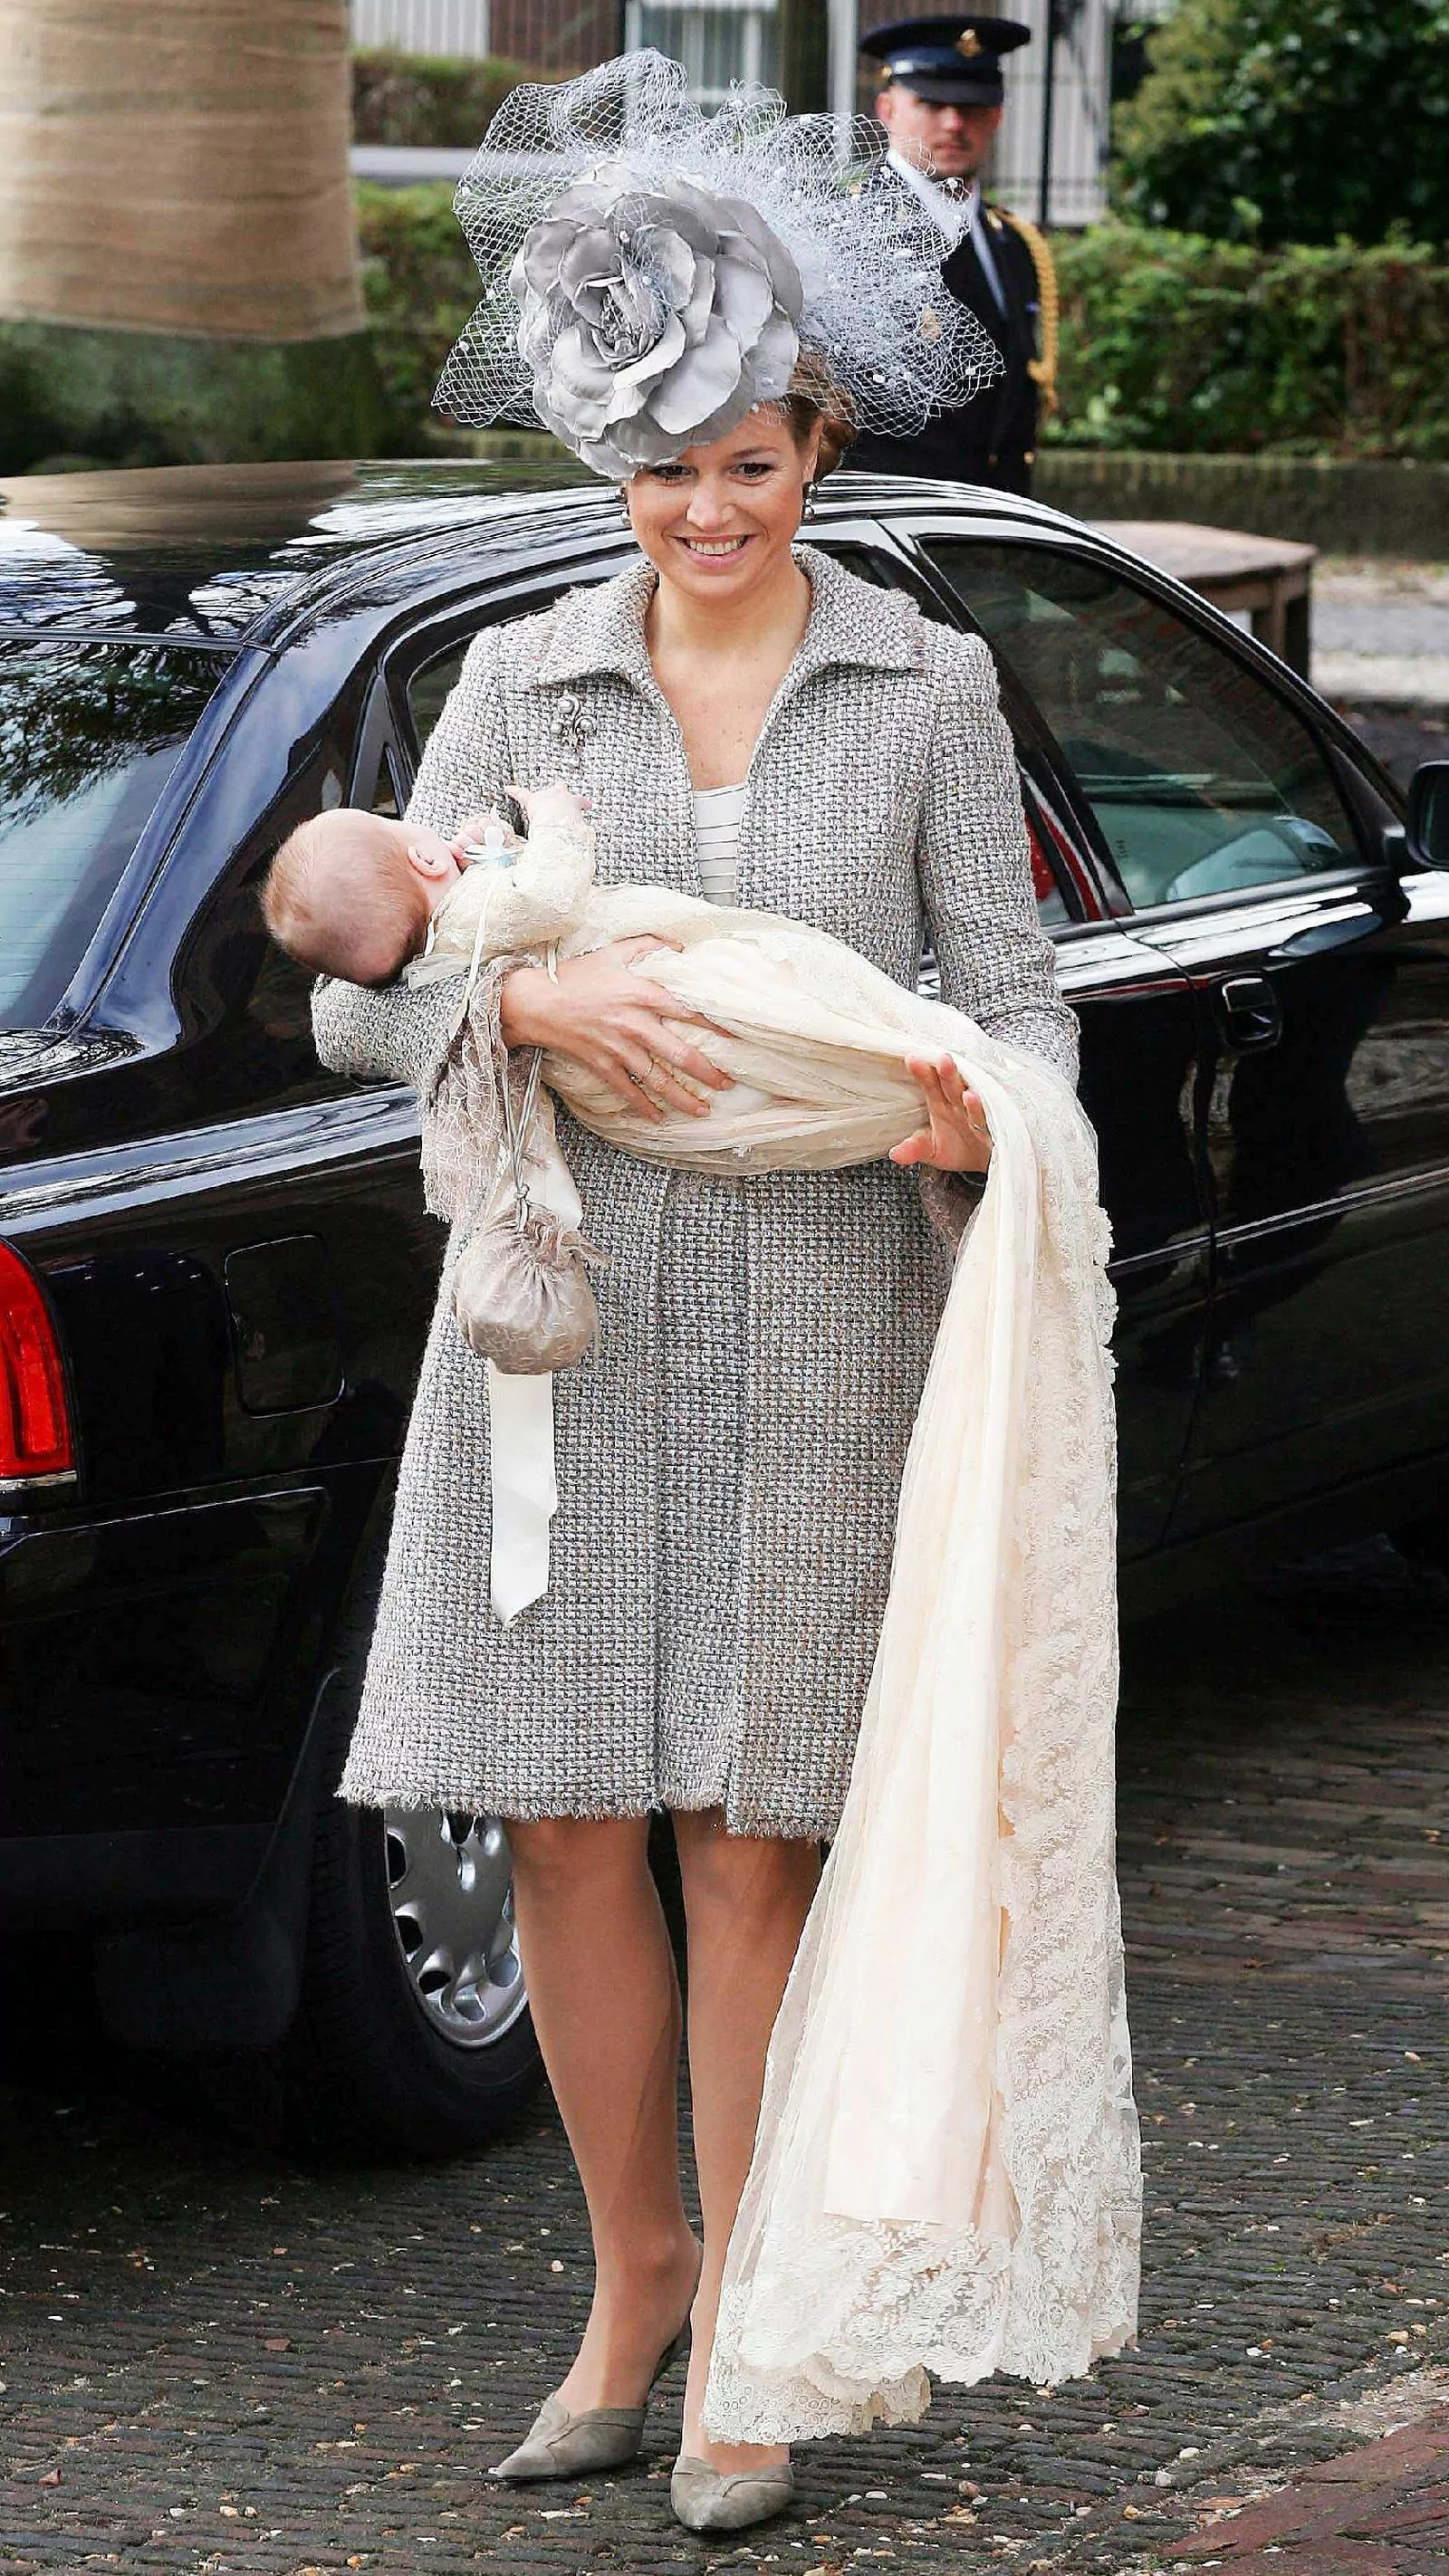 Princess Maxima with Princess Alexia at her christening ceremony in Wassenaar, 18 November 2005